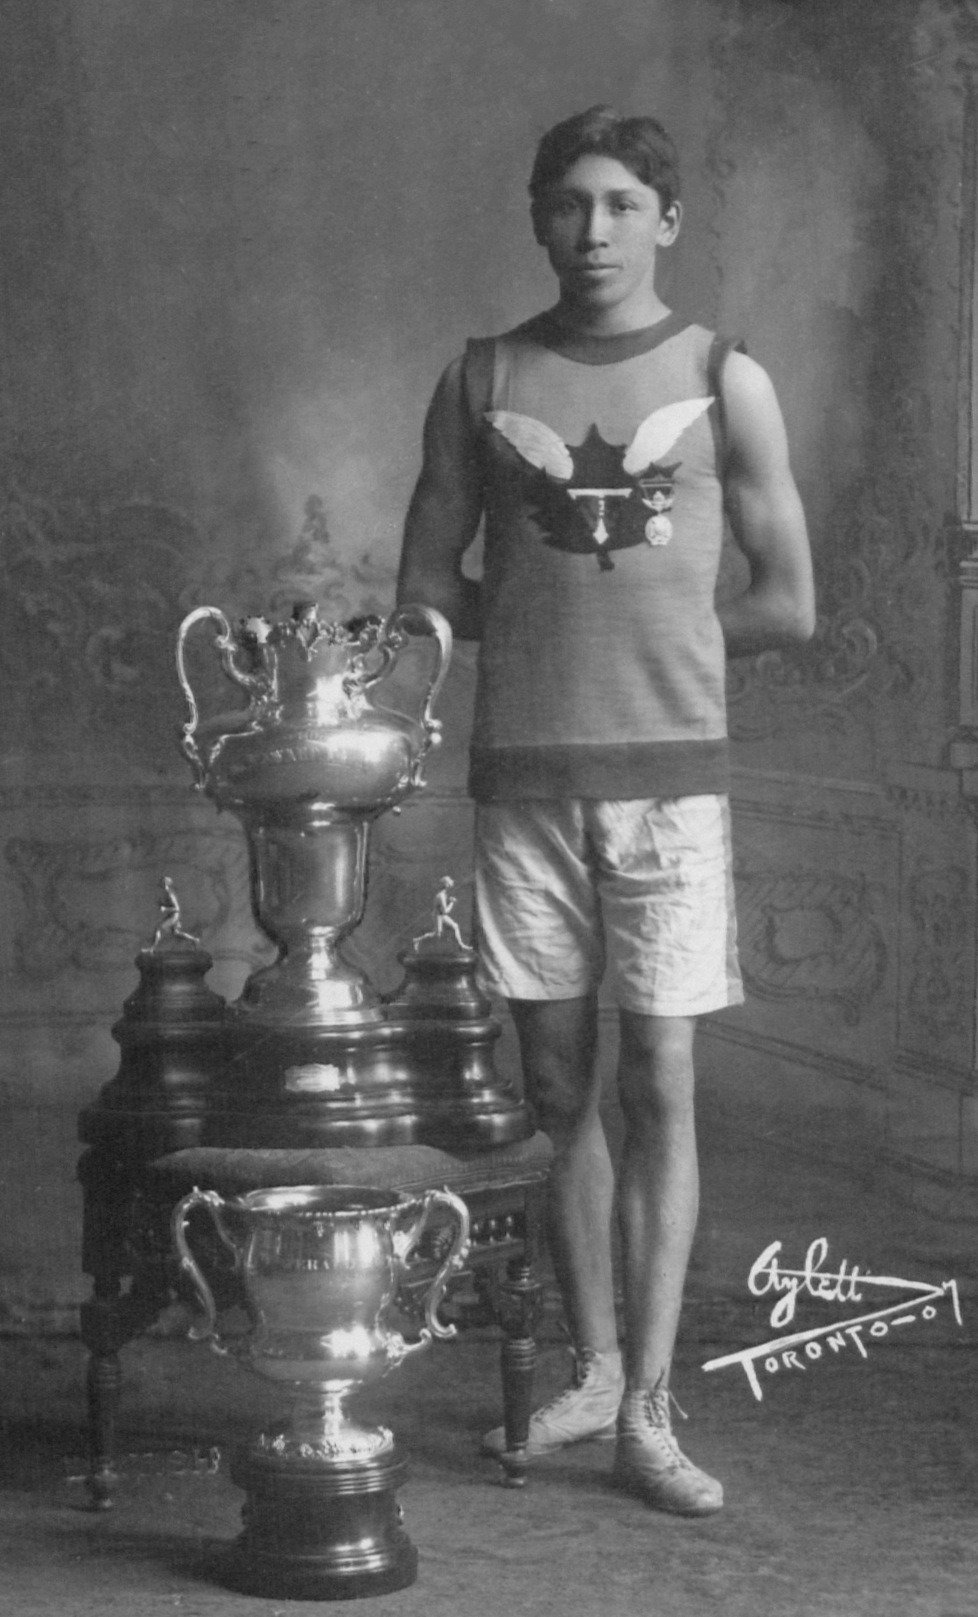 T. Longboat, the Canadian runner